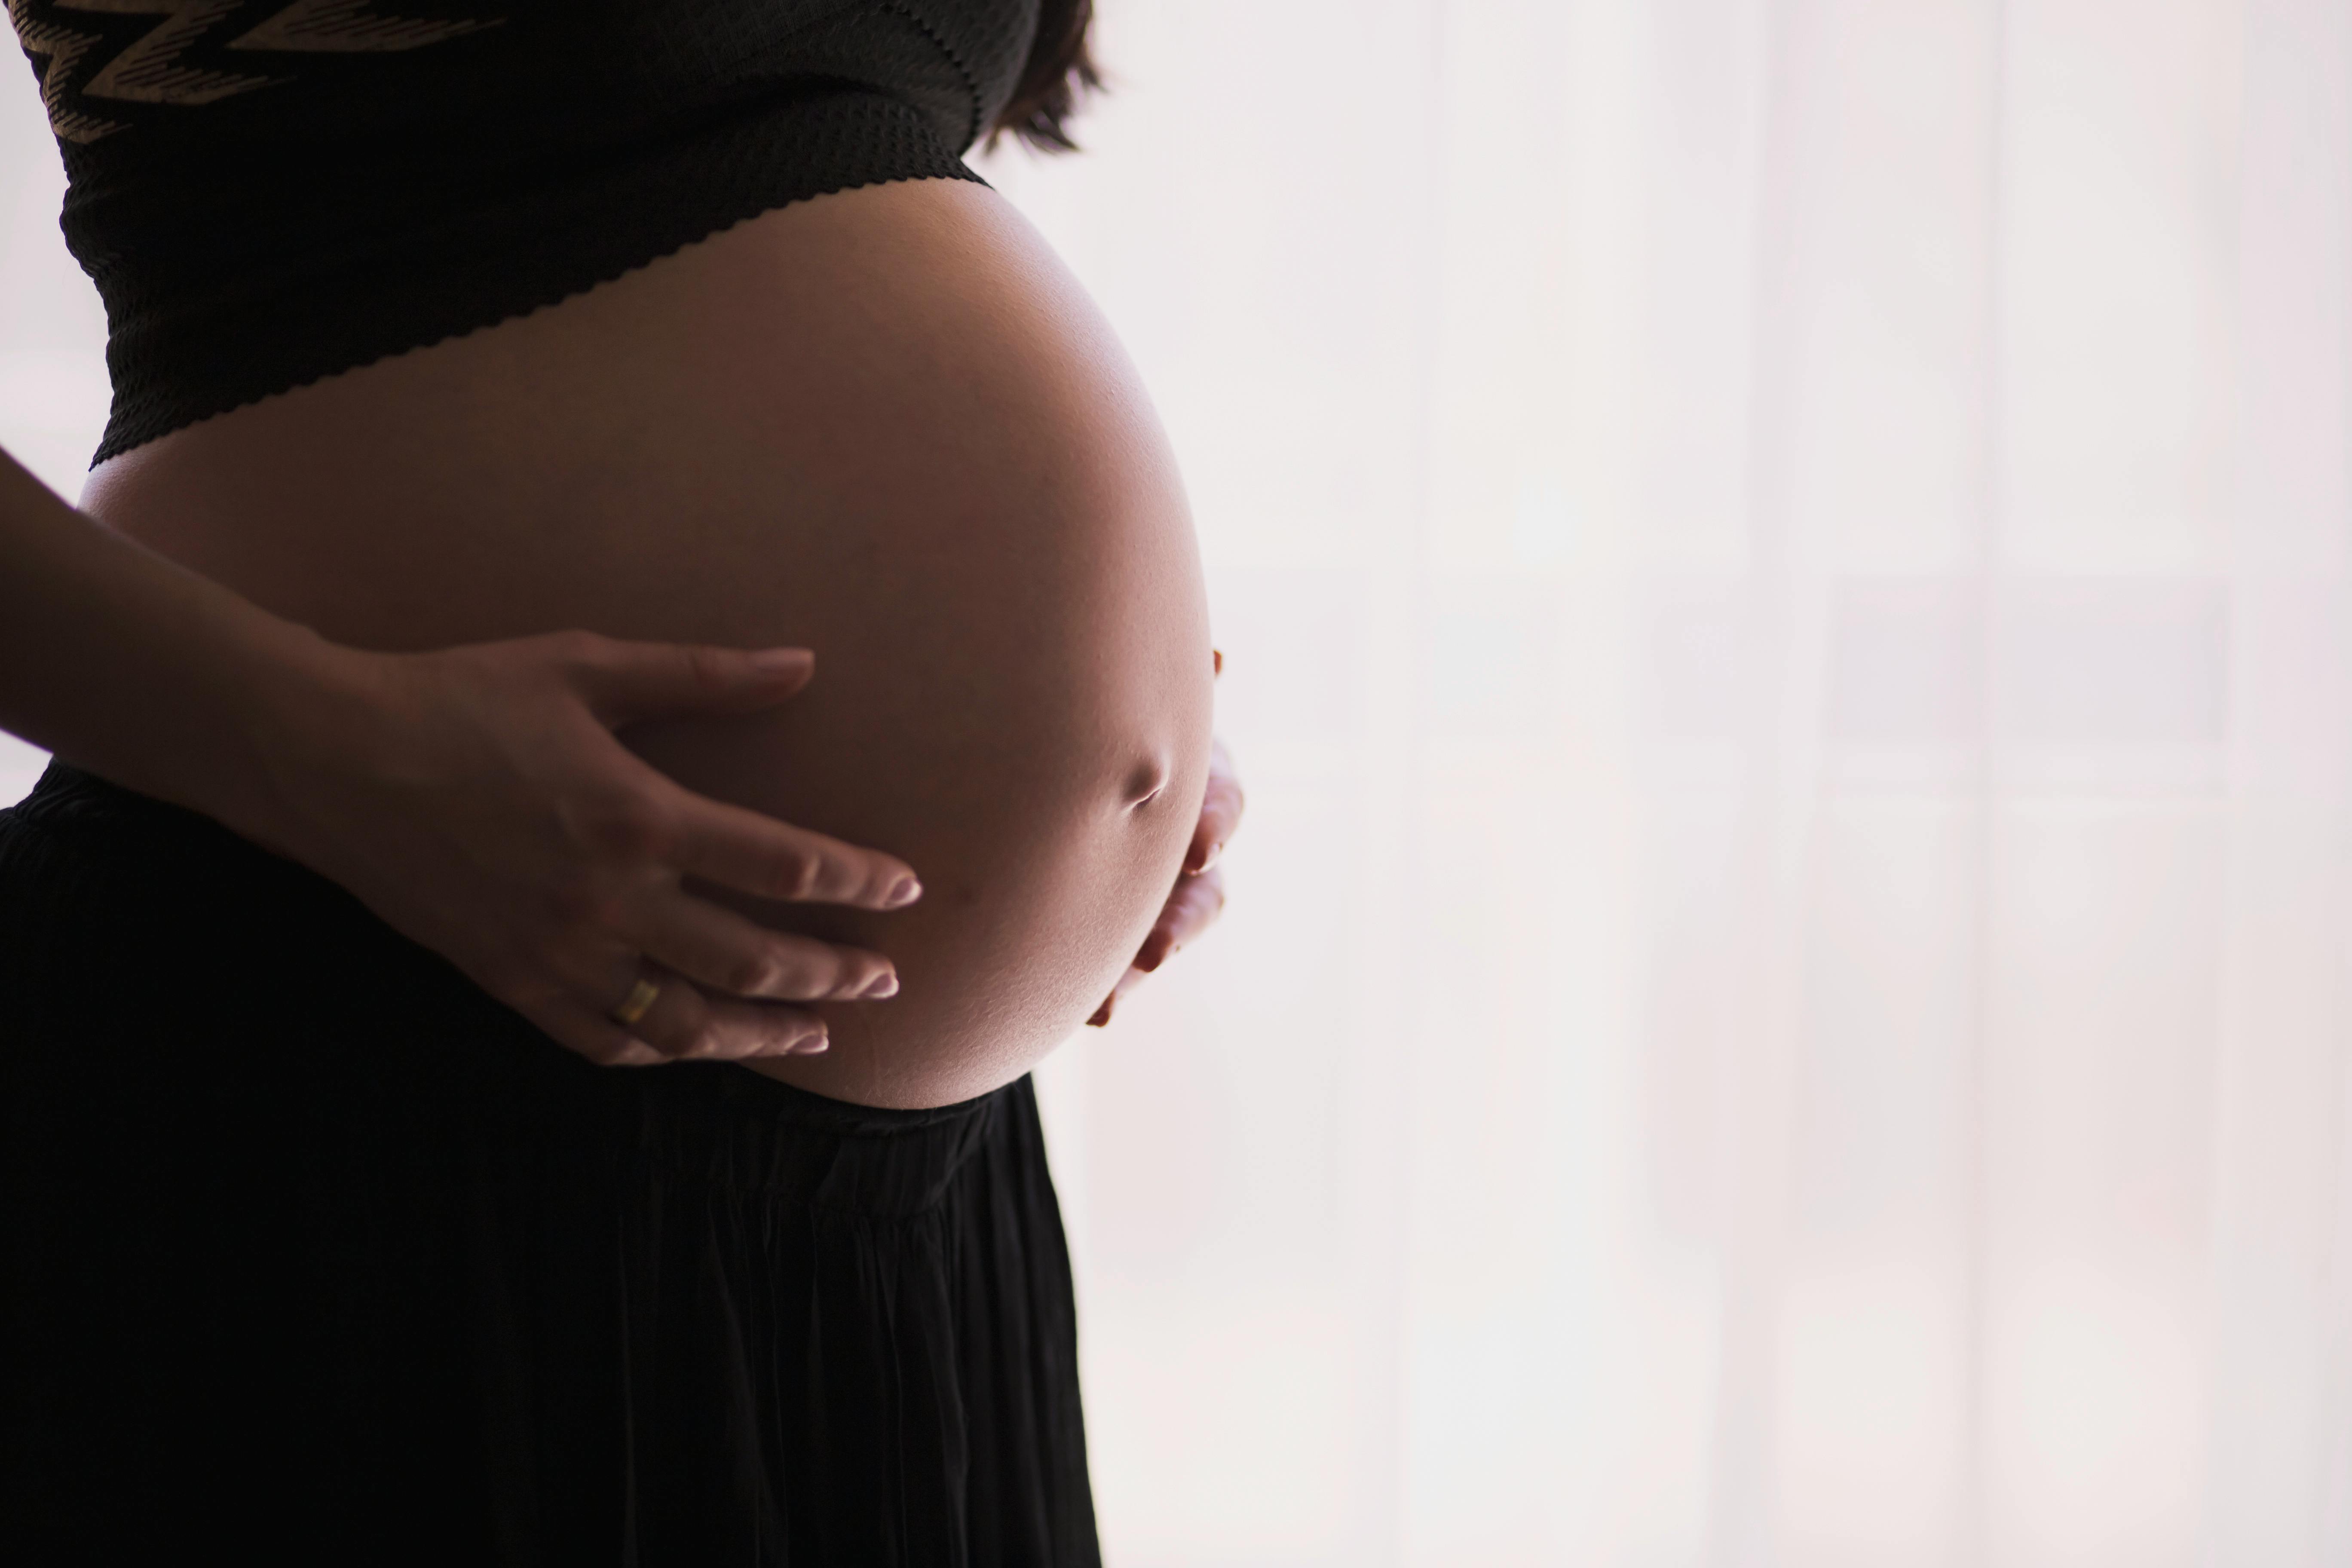 Pregnant woman holding her tummy | Photo: Pexels